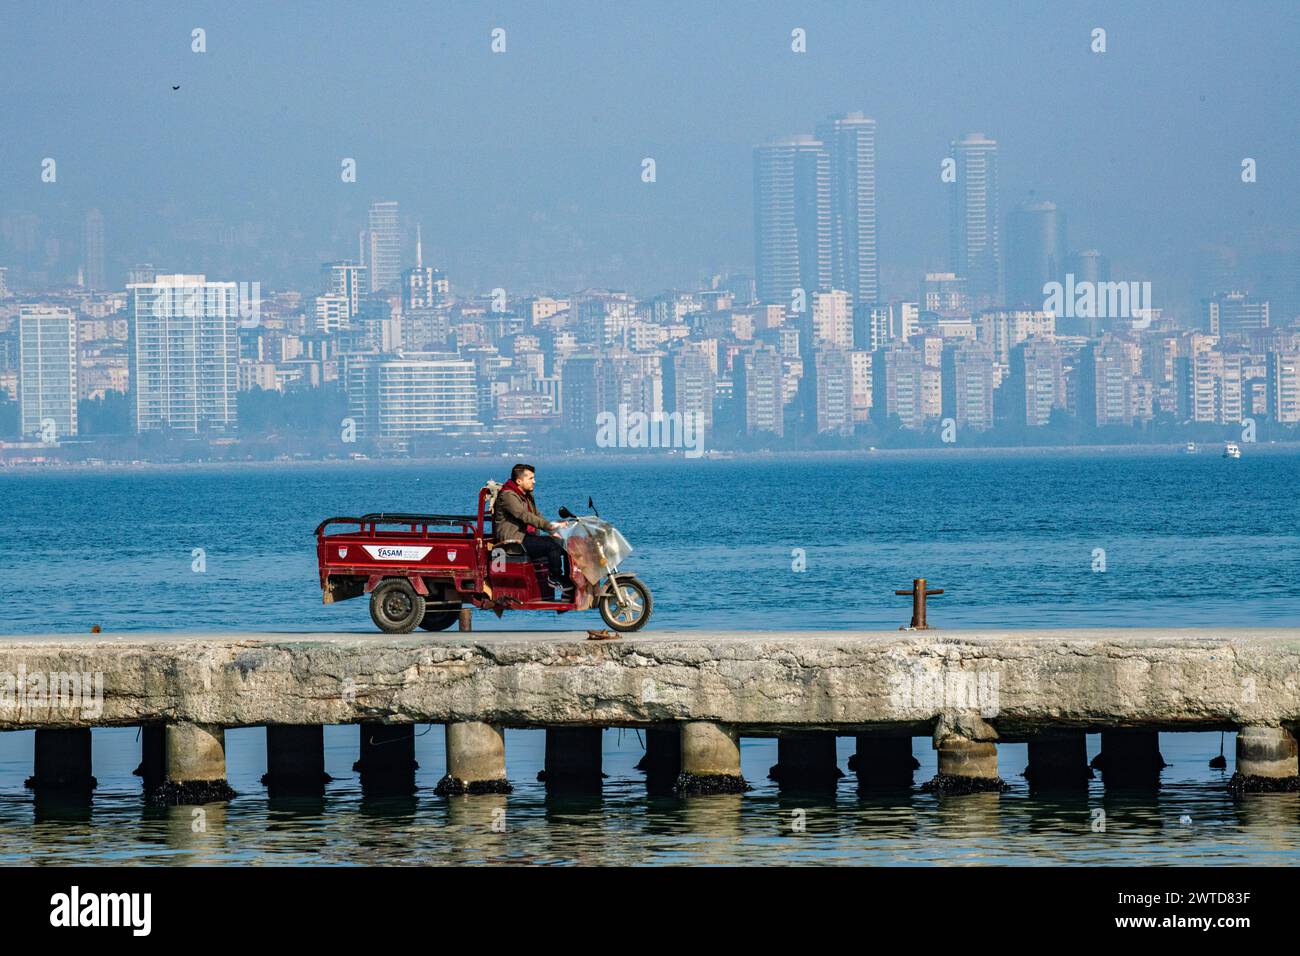 A lman on a delivery truck drives along a jetty with a backdrop of the skyscrapers and office buildings of modern Istanbul, Turkey, in the distance. Stock Photo